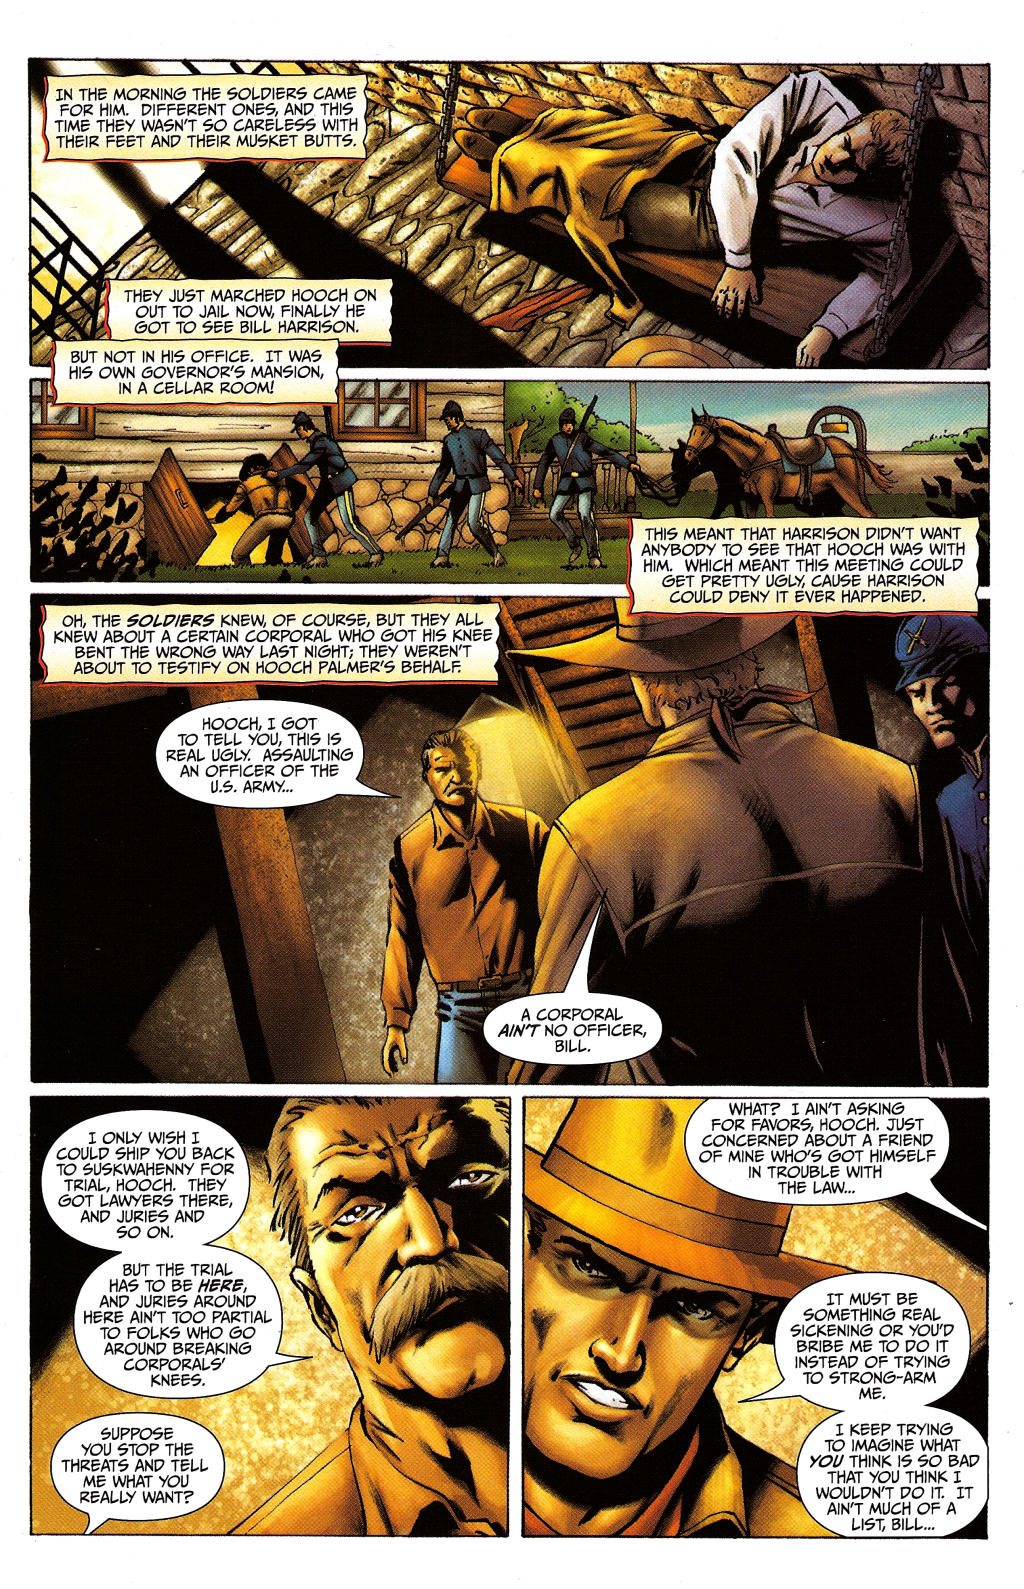 Red Prophet: The Tales of Alvin Maker issue 4 - Page 7